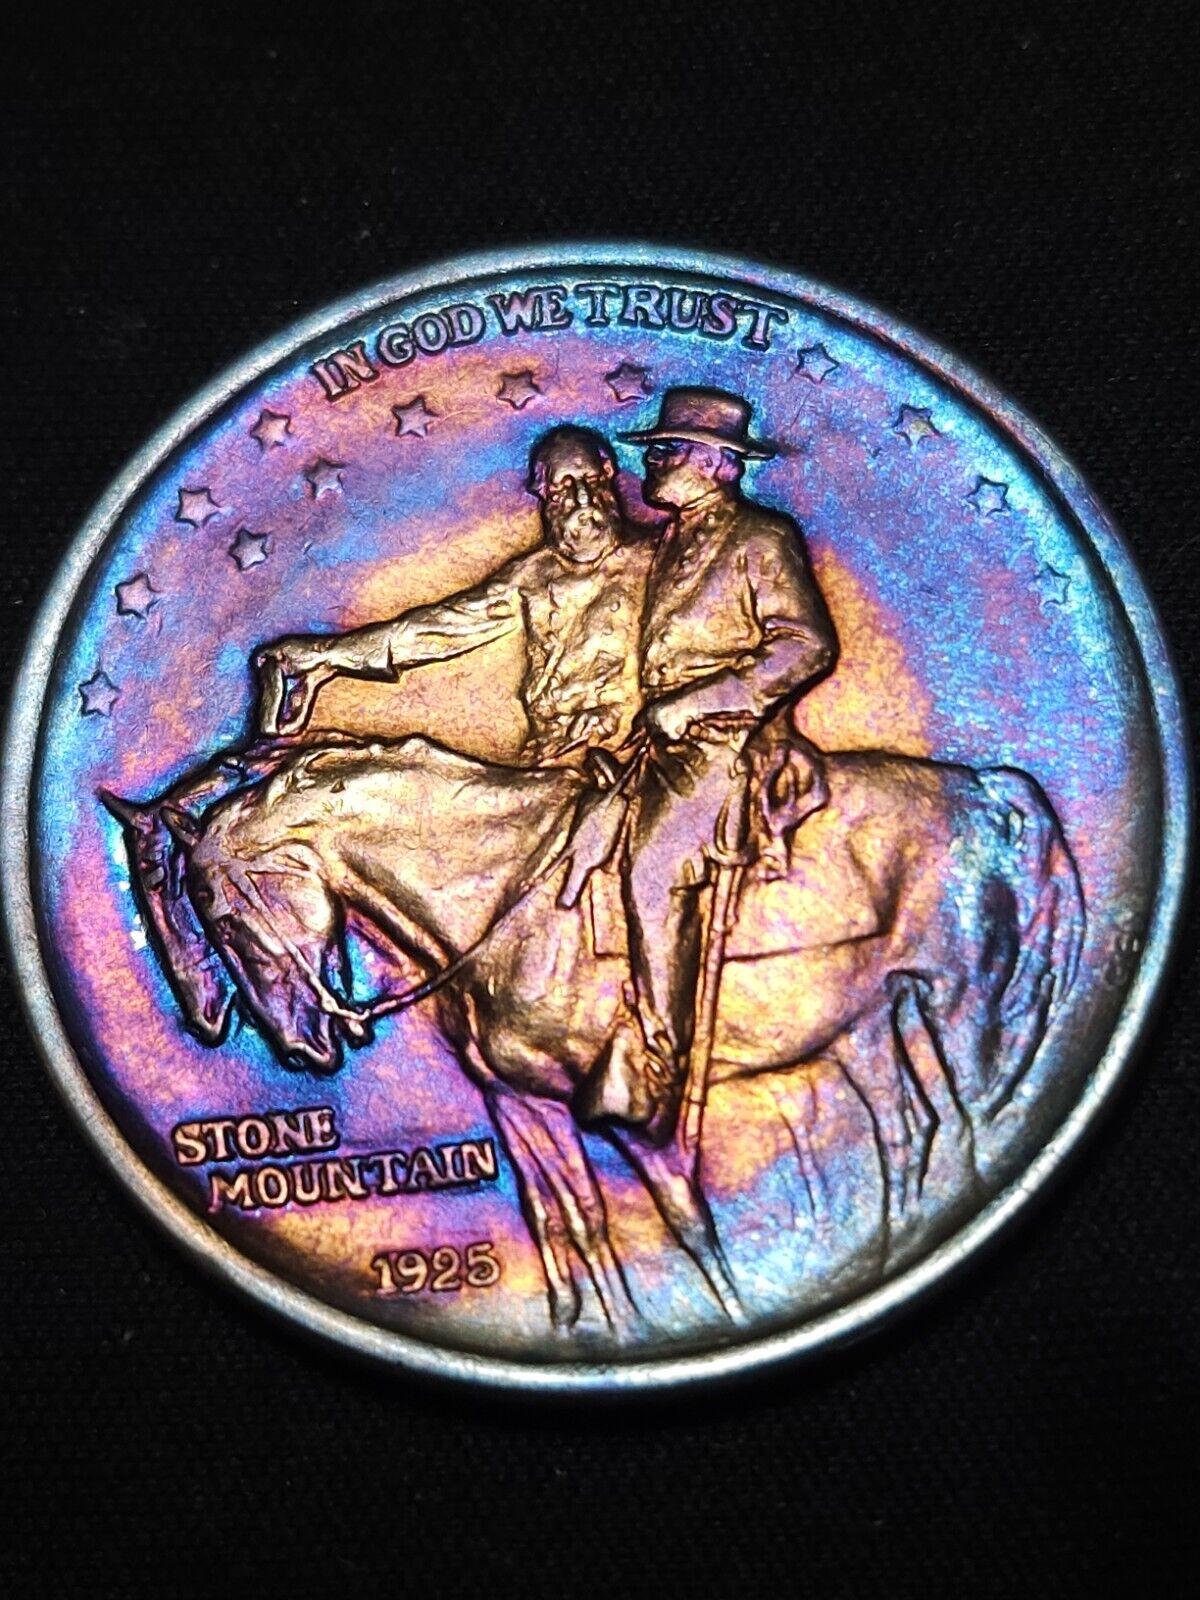 Toned Commemorative Coins